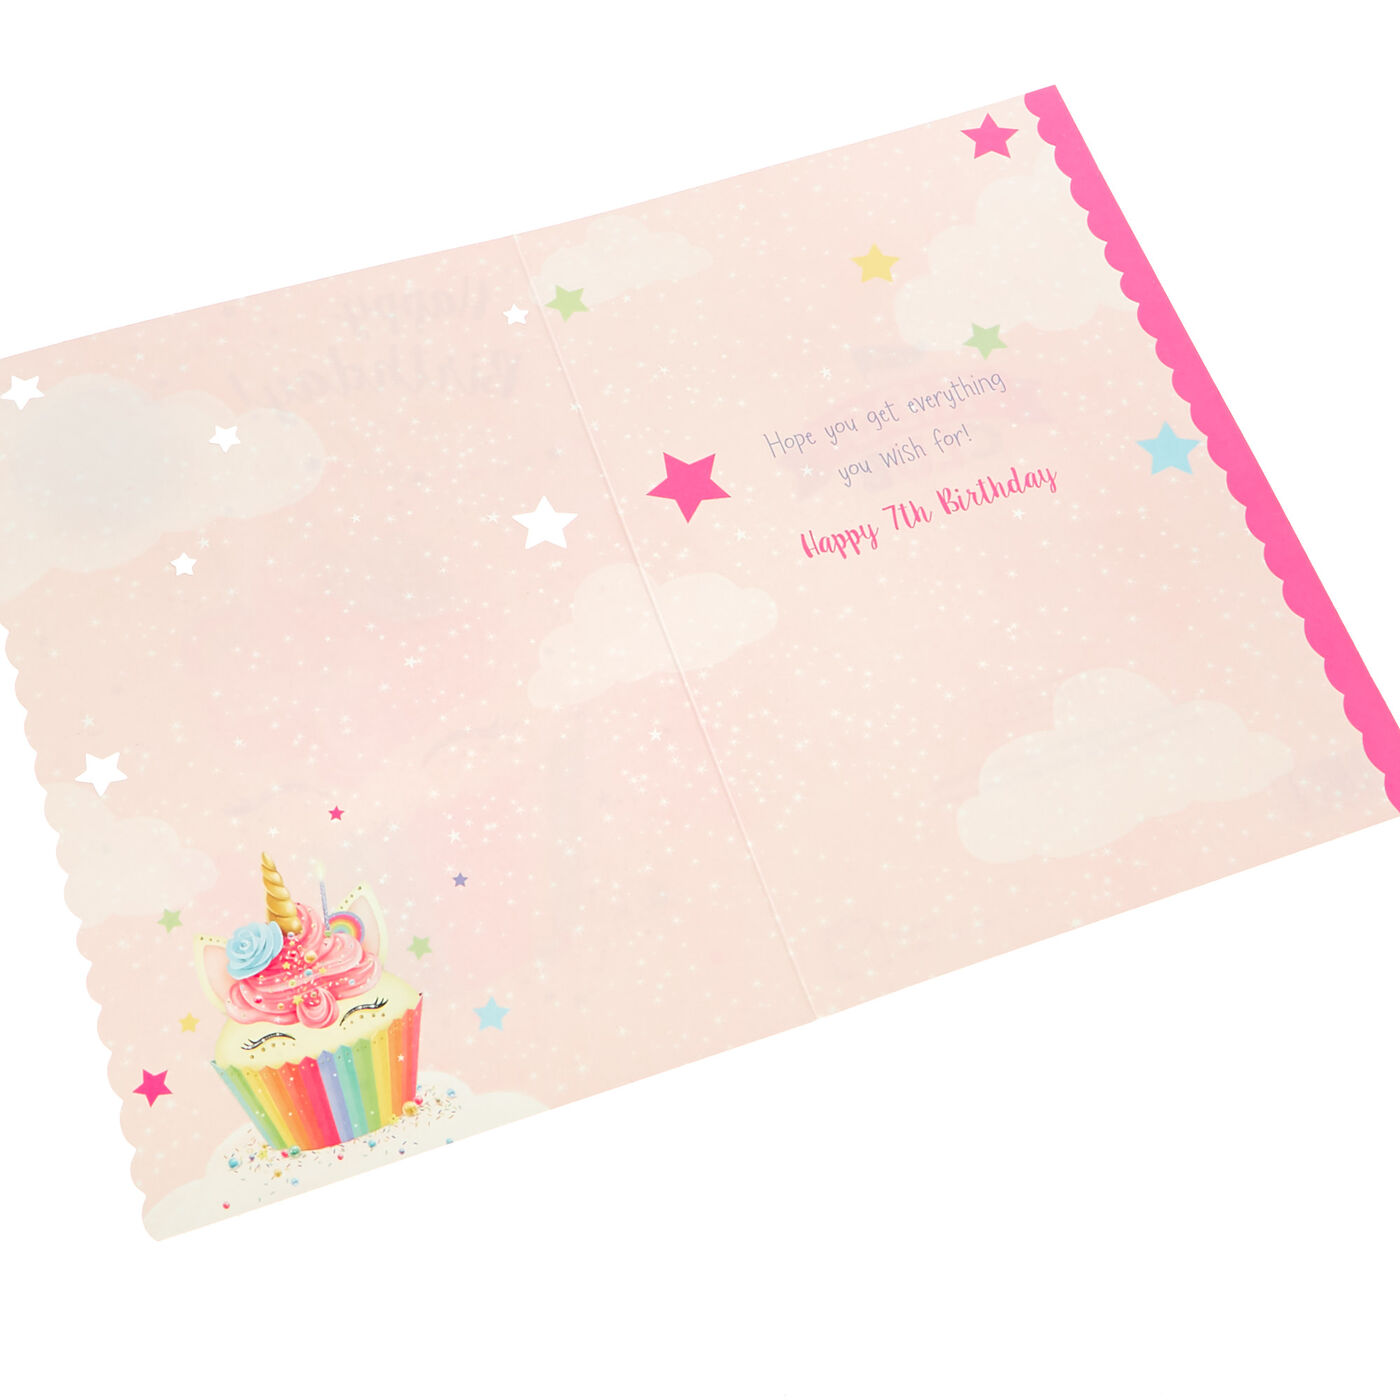 Buy 7th Birthday Card - Unicorn Cupcake (With Badge) for GBP 1.29 ...